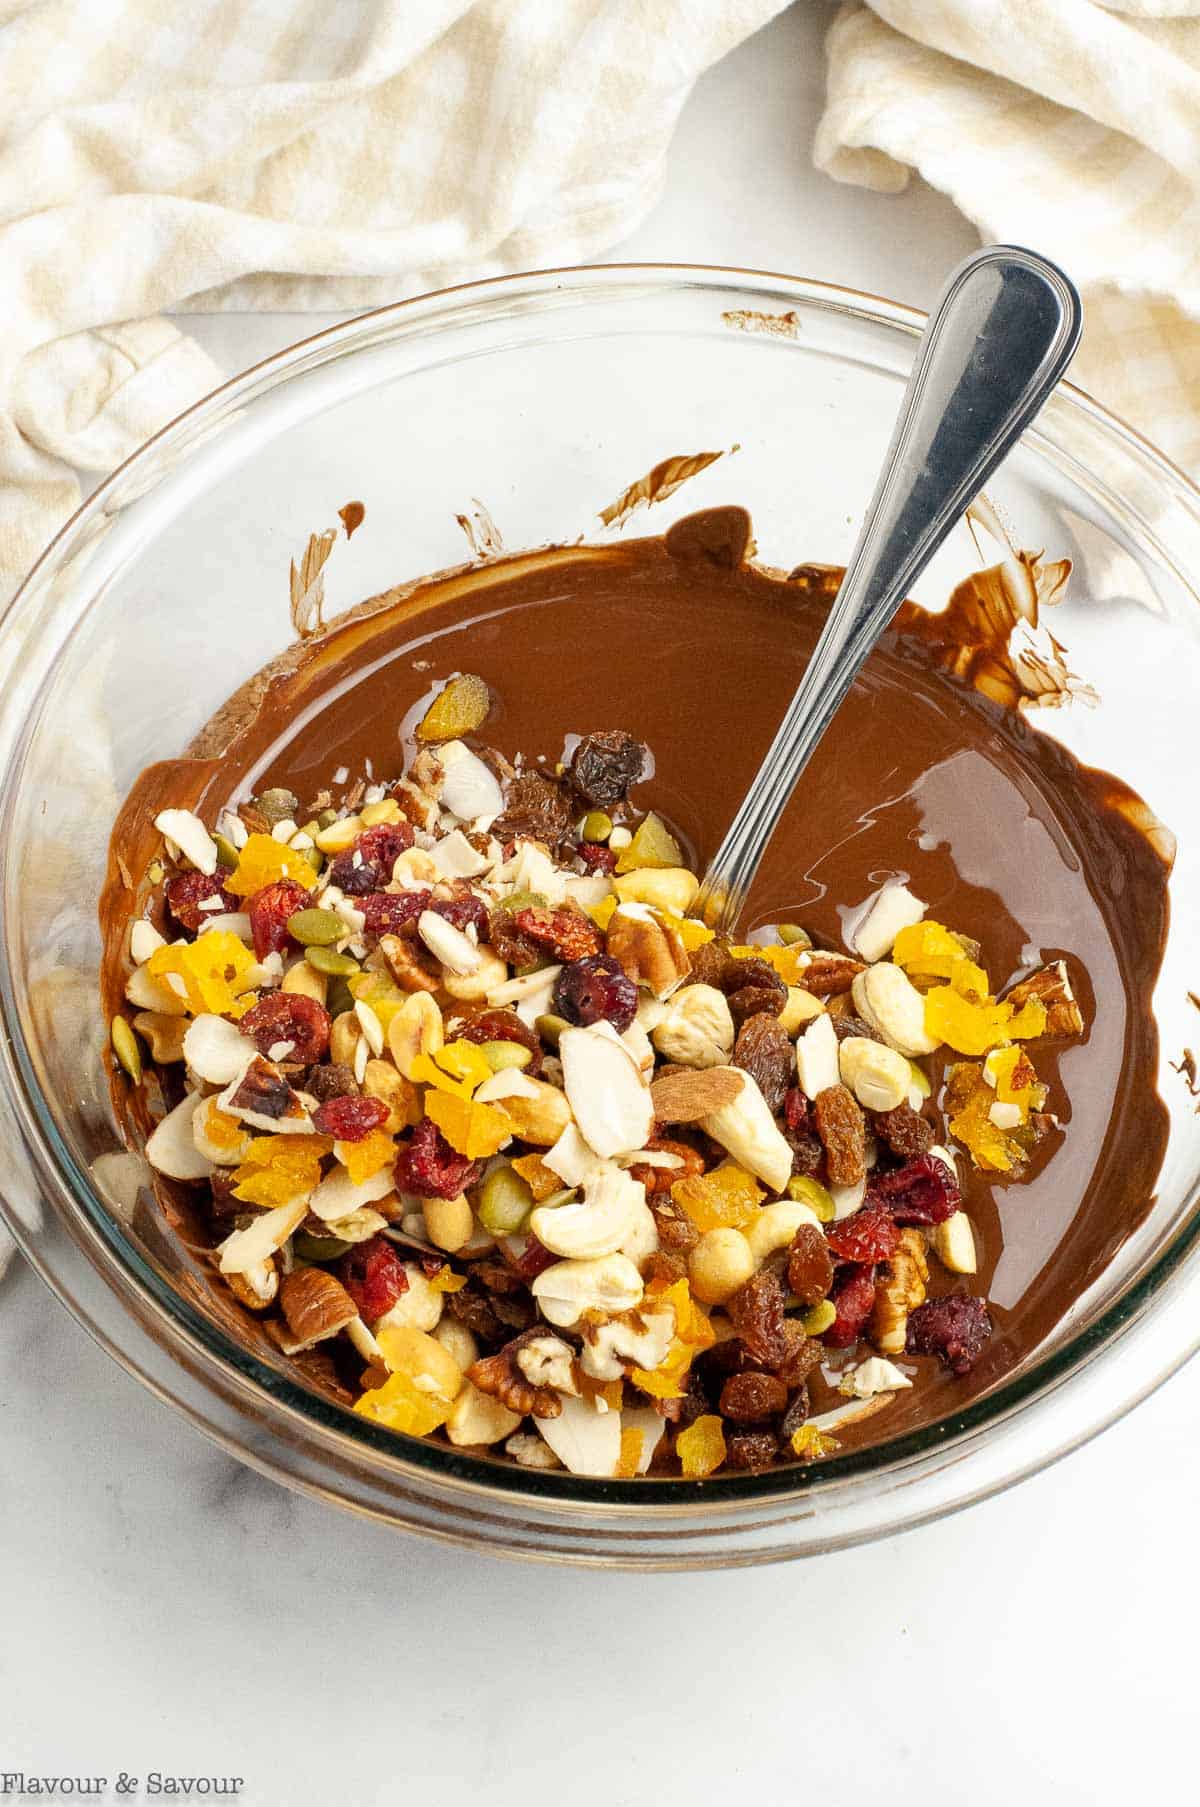 Nuts and dried fruit in a bowl of melted chocolate.